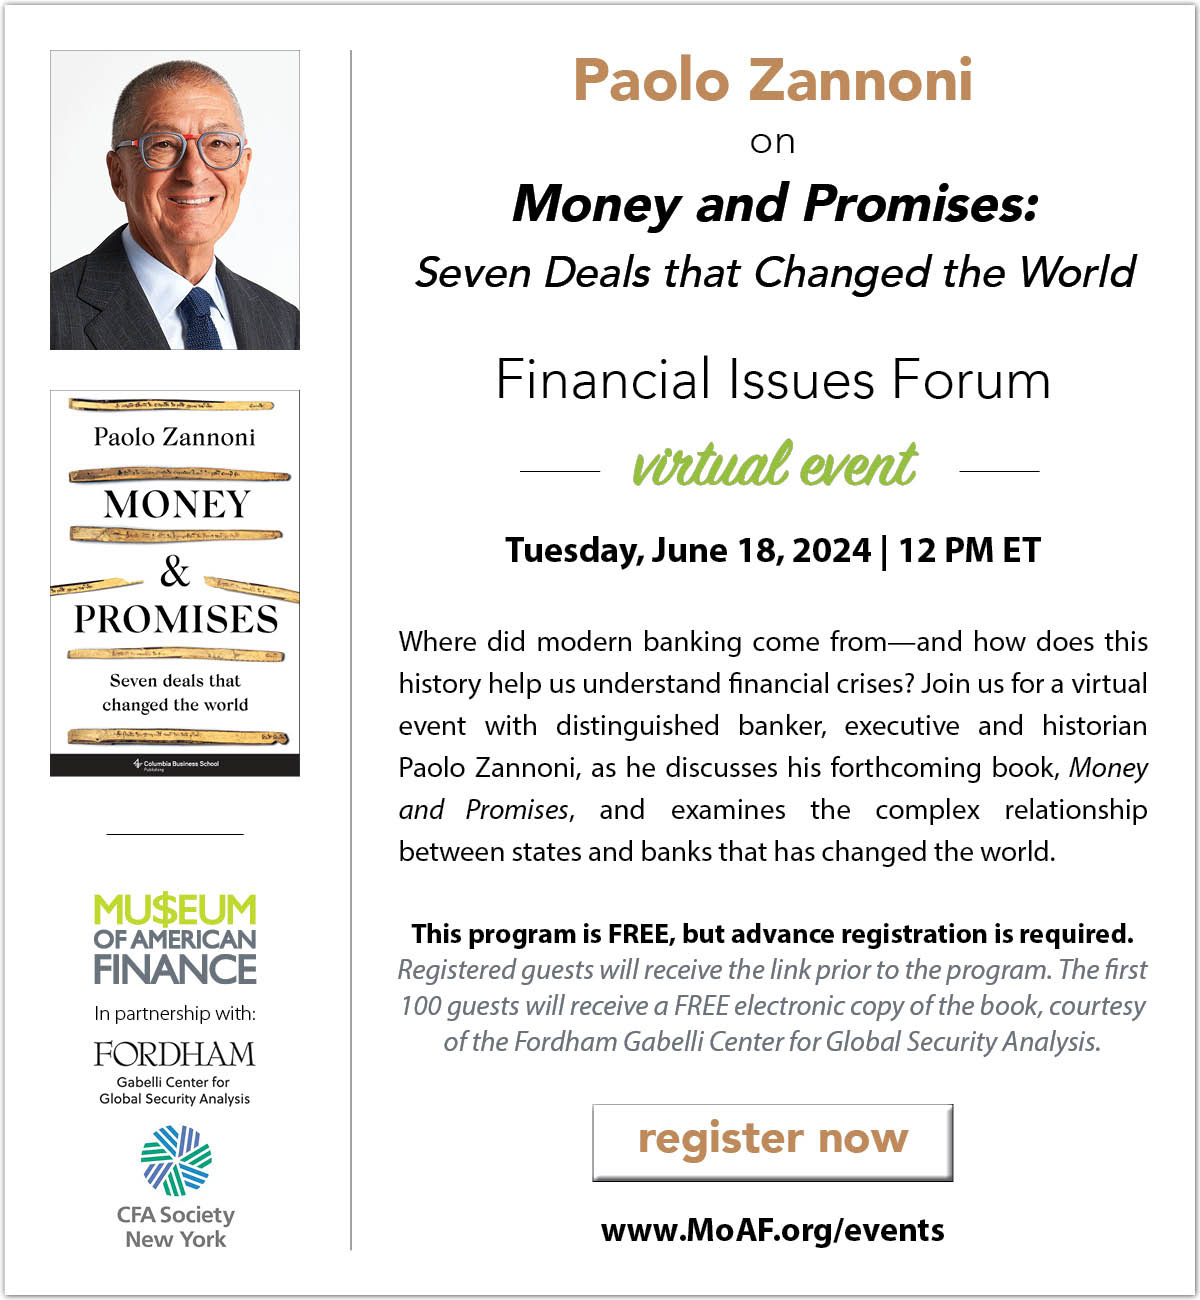 Paolo Zannoni on Money and Promises